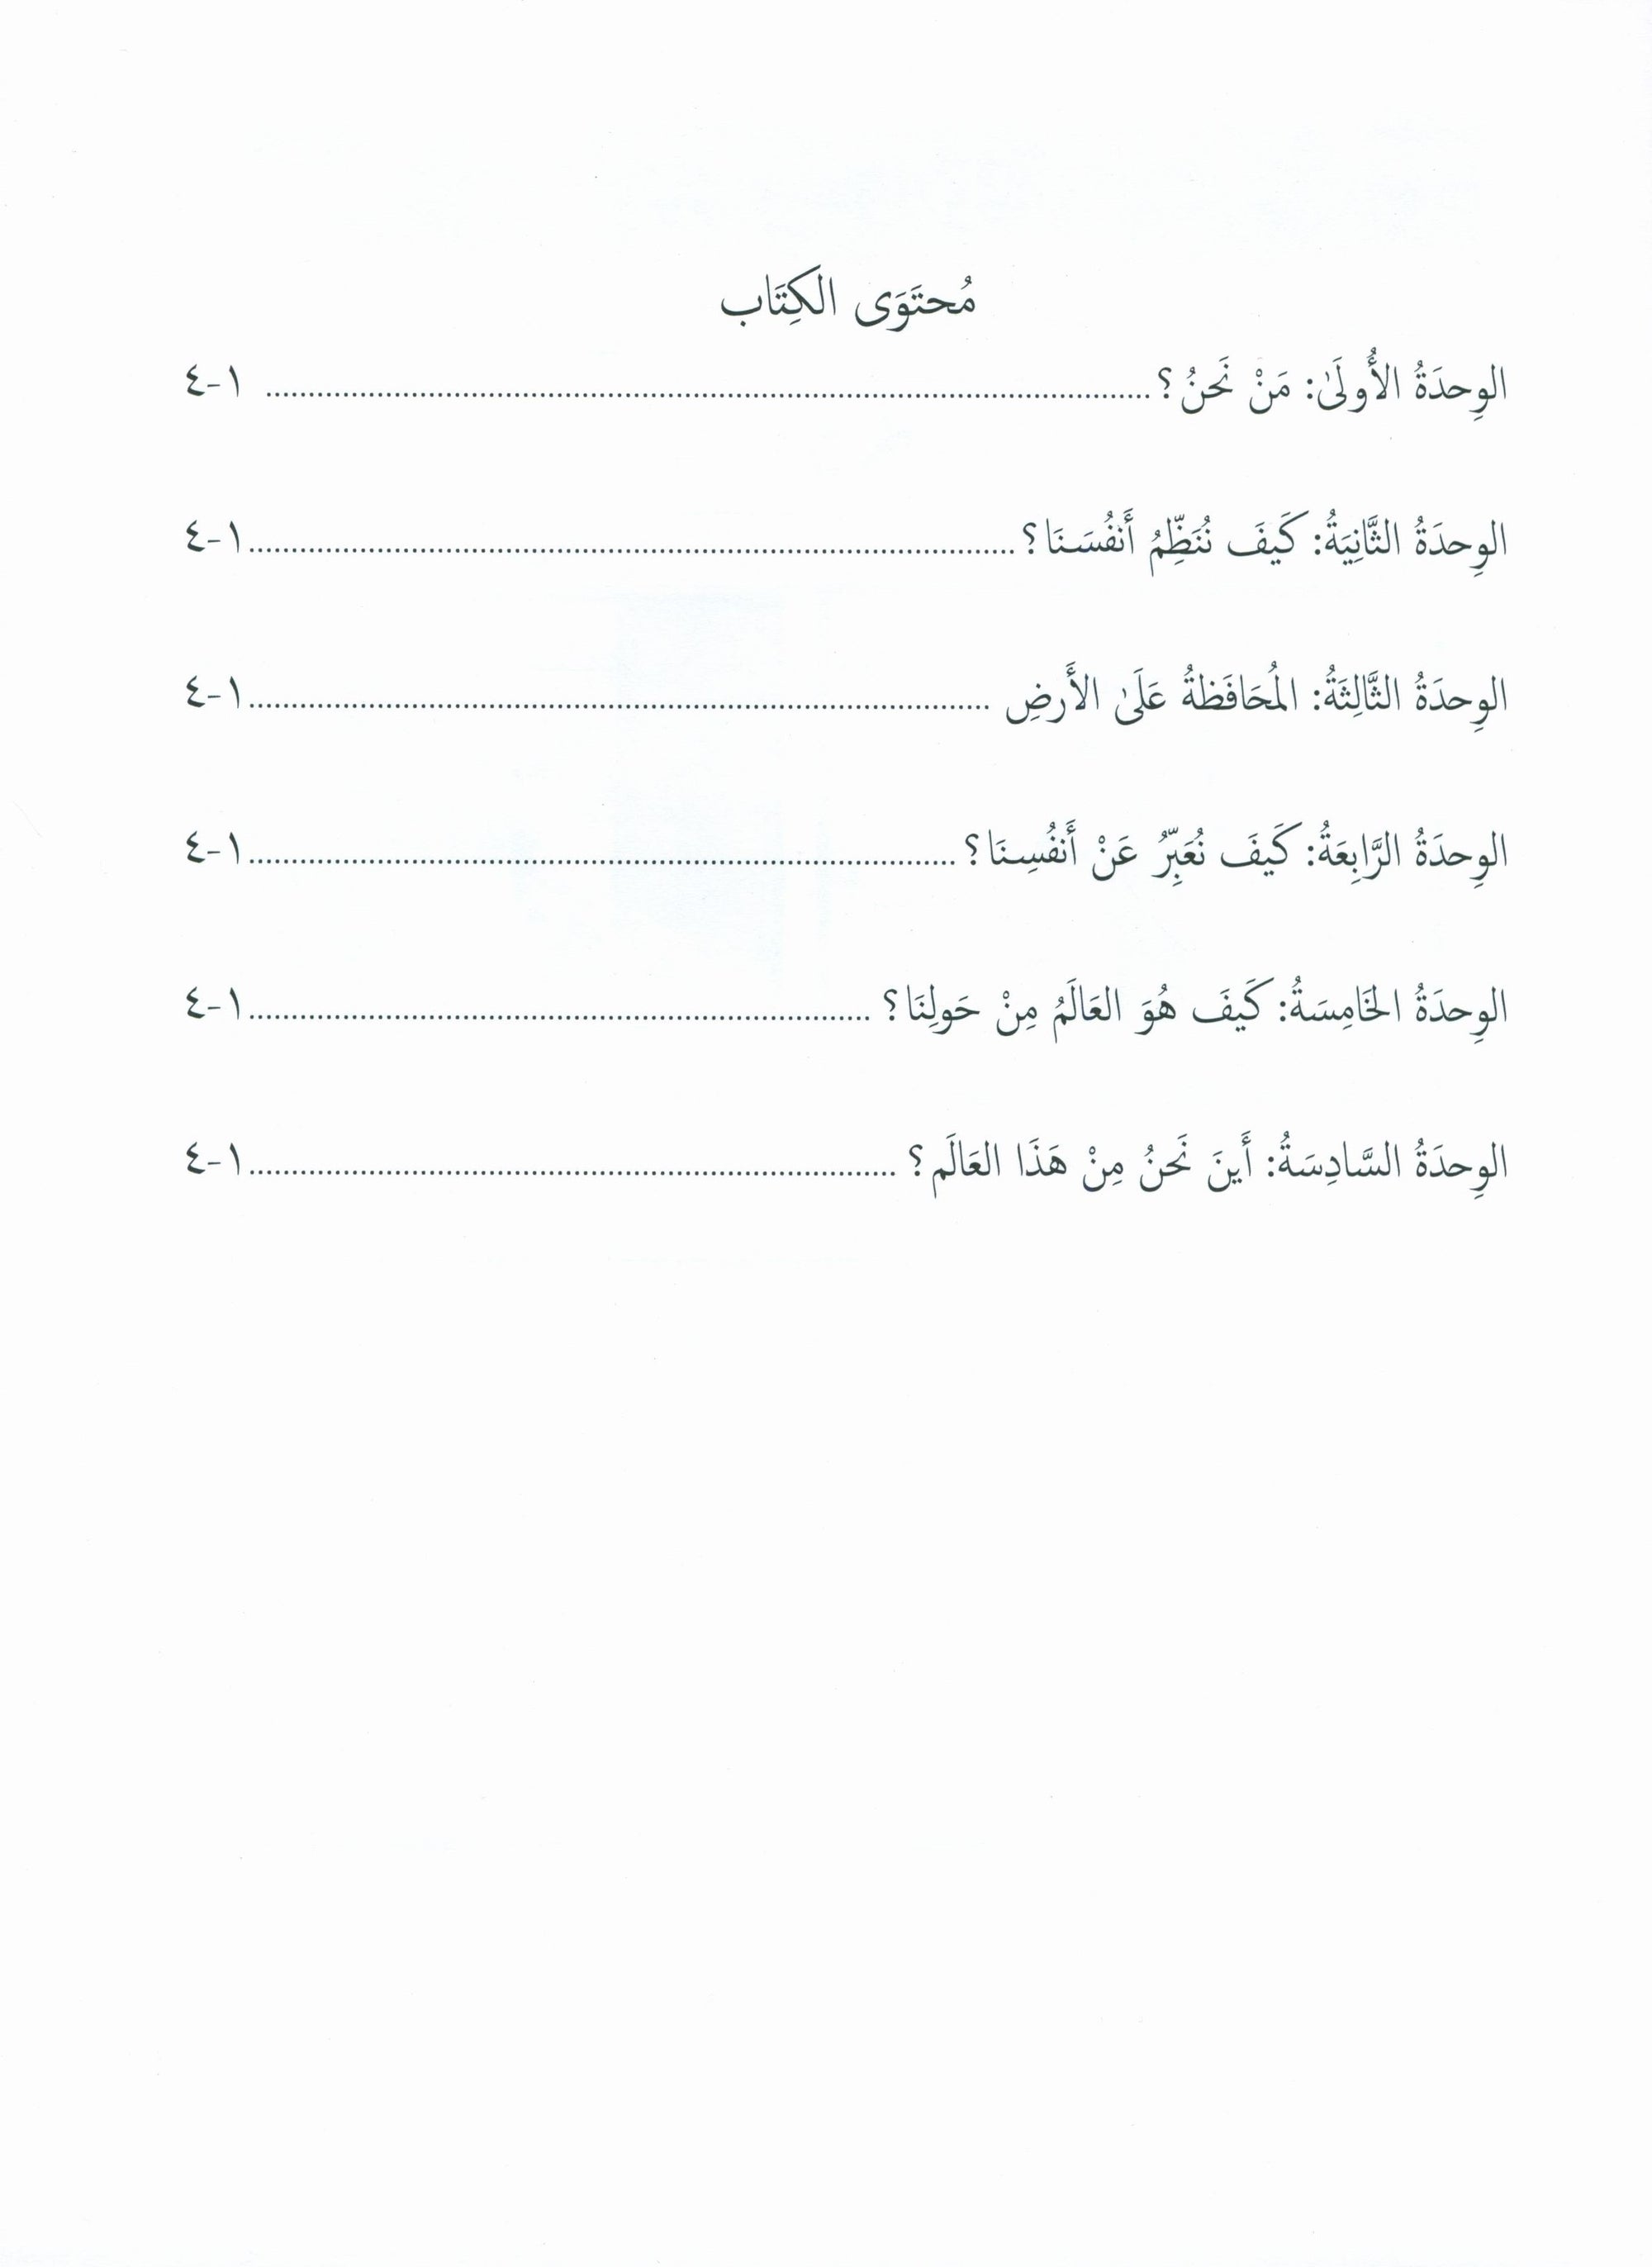 Our Language Is Our Pride Assessment Level 4 لغتنا فخرنا